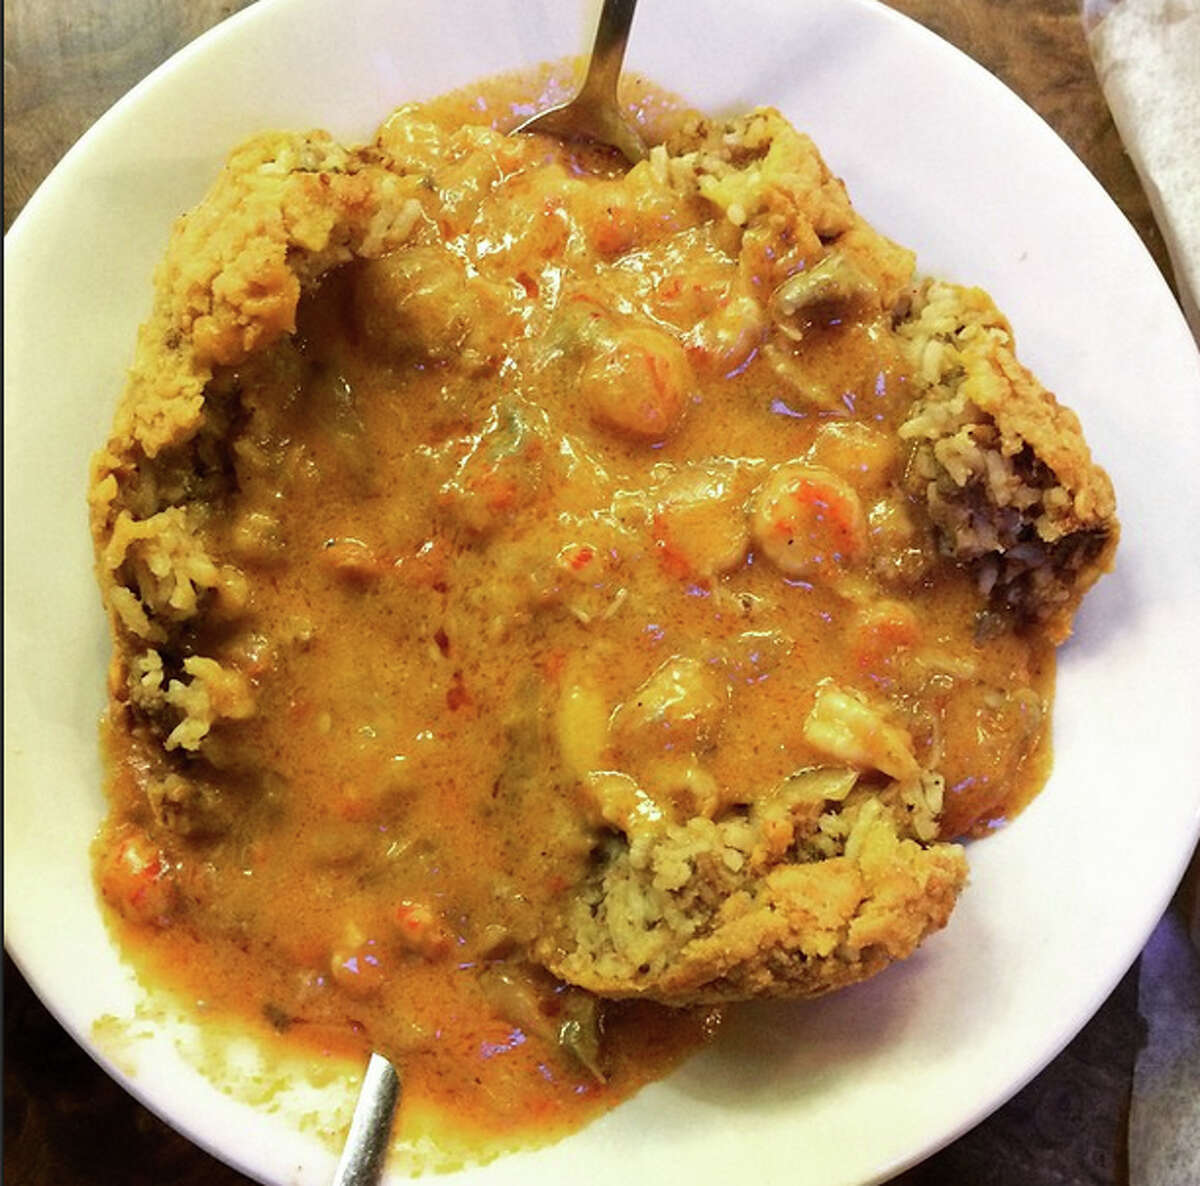 Al-T's BC Special is a deconstructed, cheese-filled fried boudin ball slathered in crawfish etouffee.